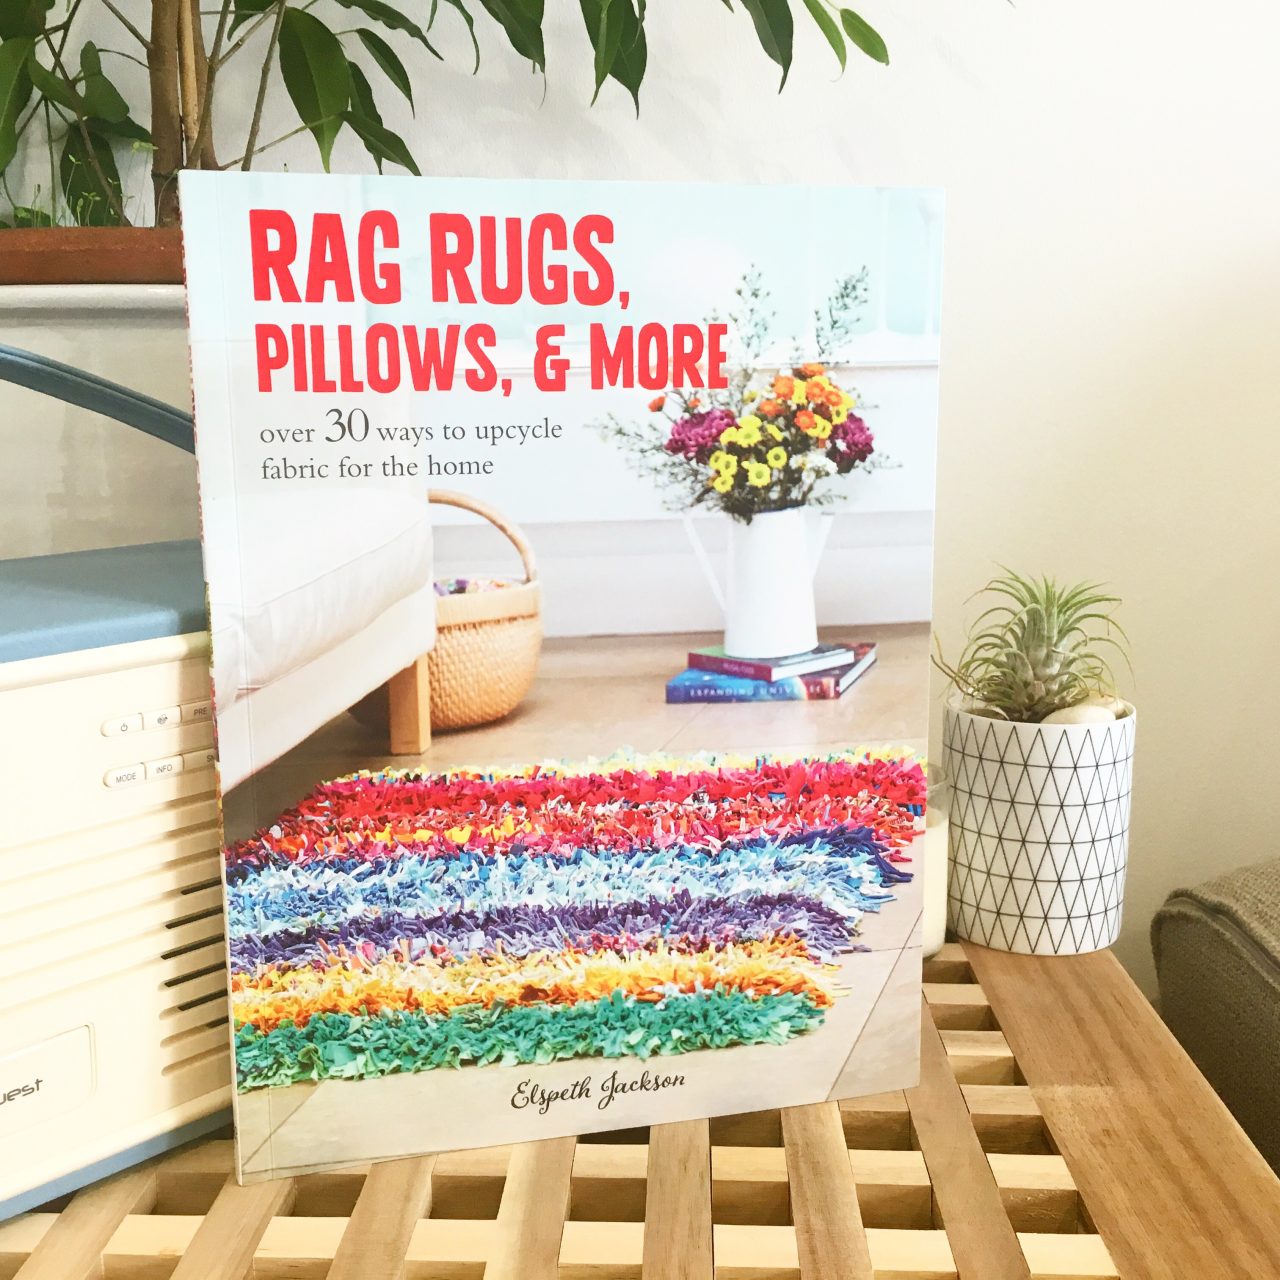 Rag rugs, Pillows and More book by Elspeth Jackson